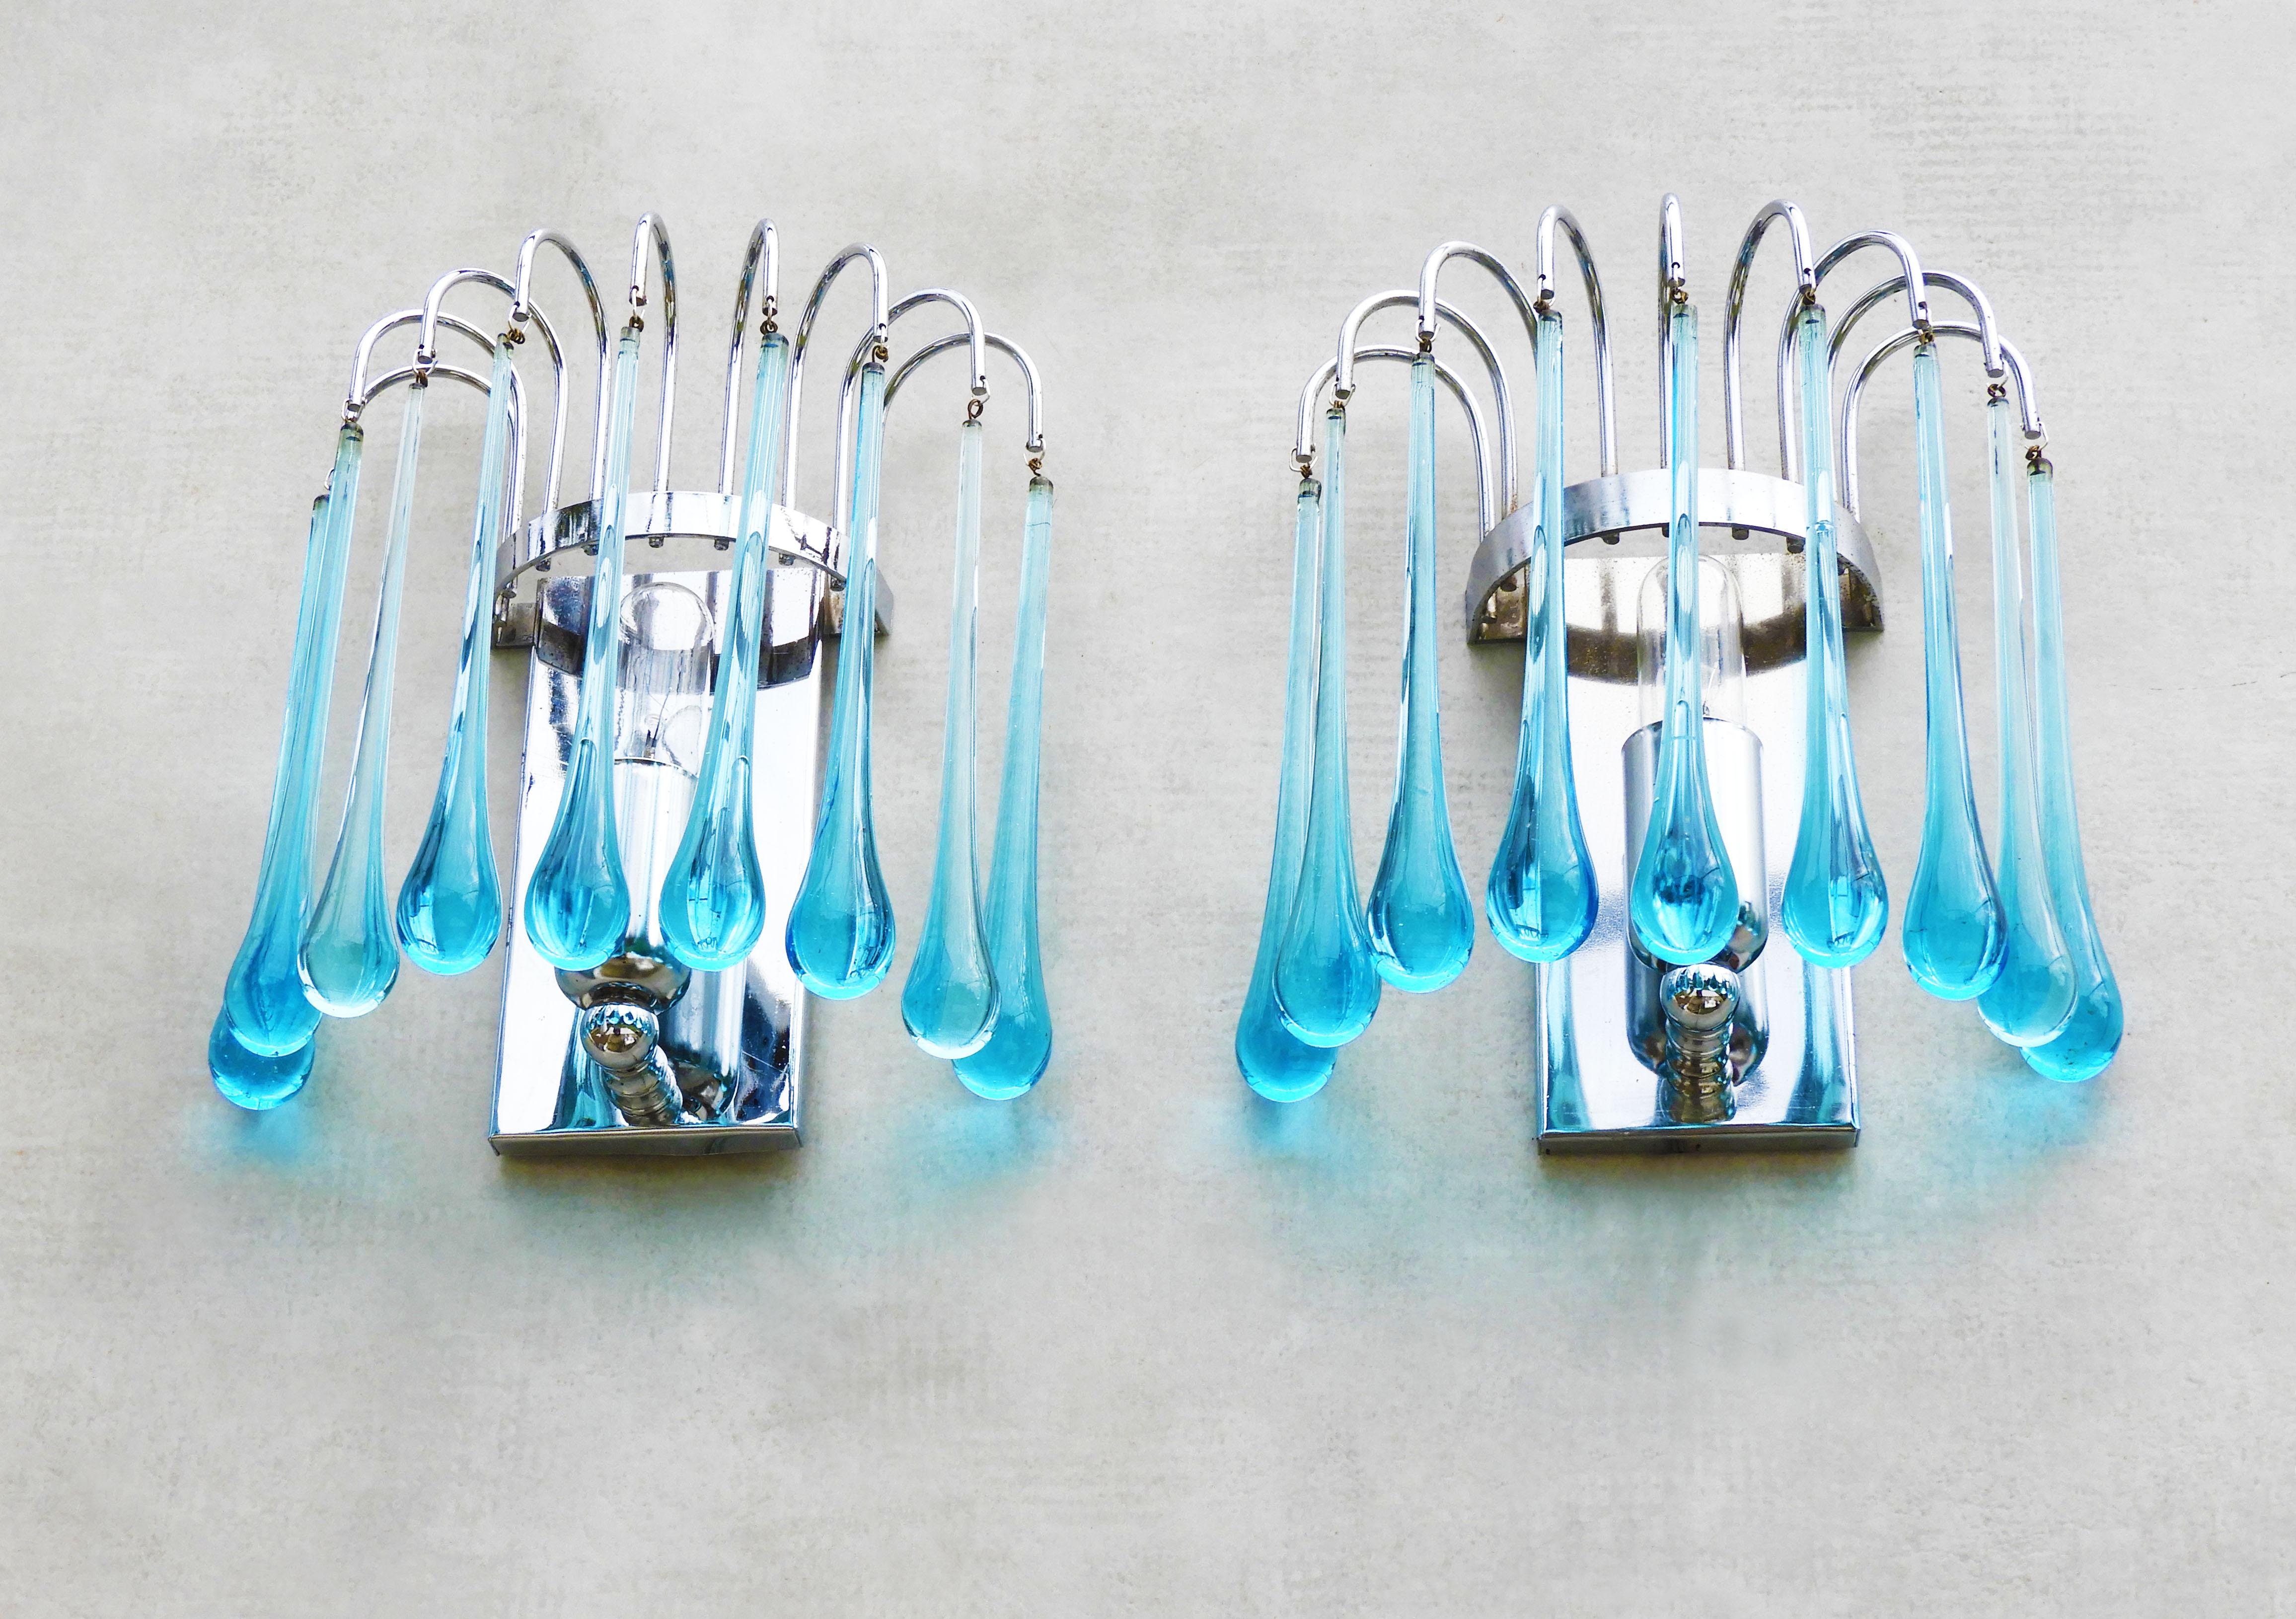 Pair of Waterfall Venini Style Wall Light Sconces Blue Murano Glass & Chrome 70s For Sale 1